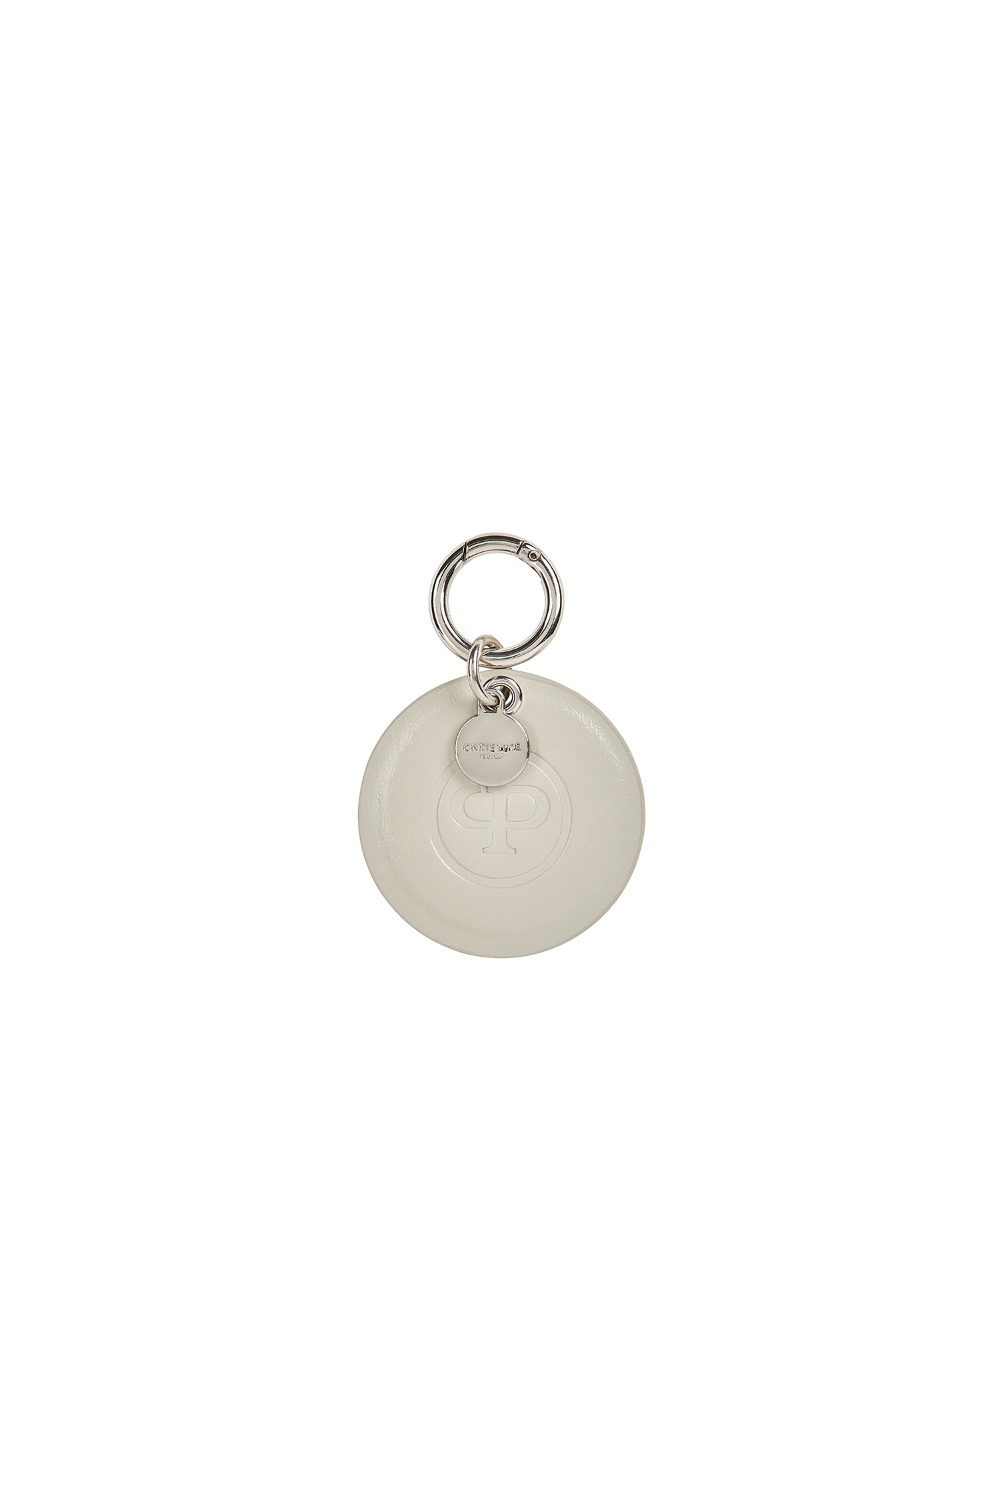 CP ROUND KEY RING(CREAMY OYSTER)